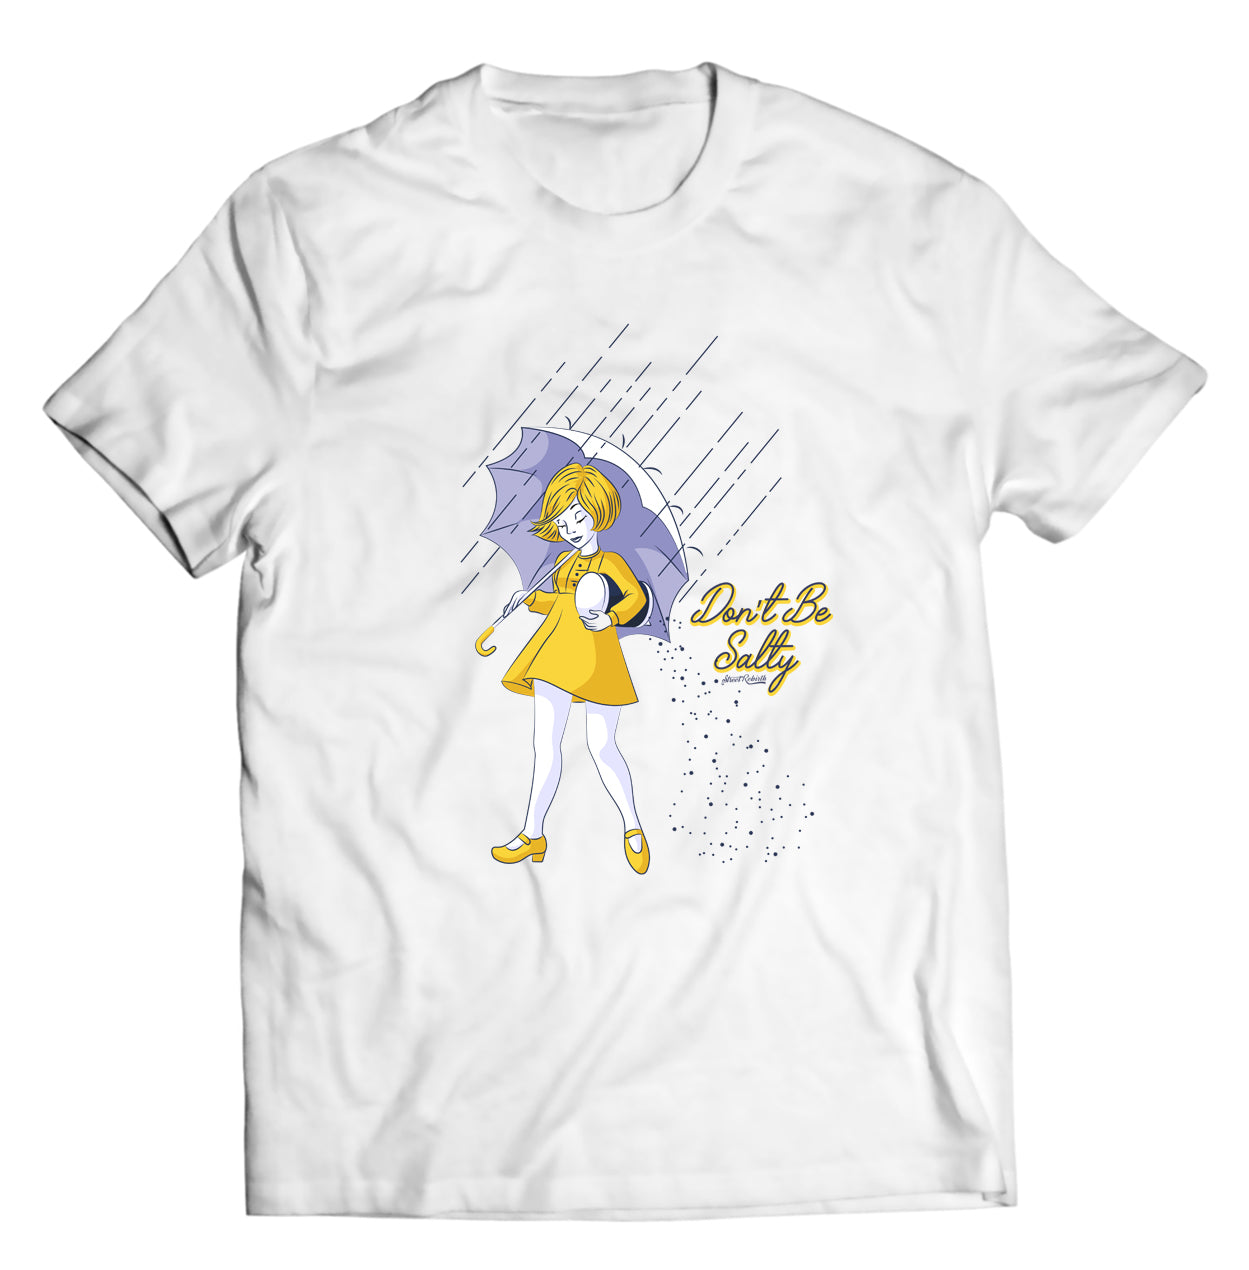 Dont Be Salty Shirt - Direct To Garment Quality Print - Unisex Shirt - Gift For Him or Her